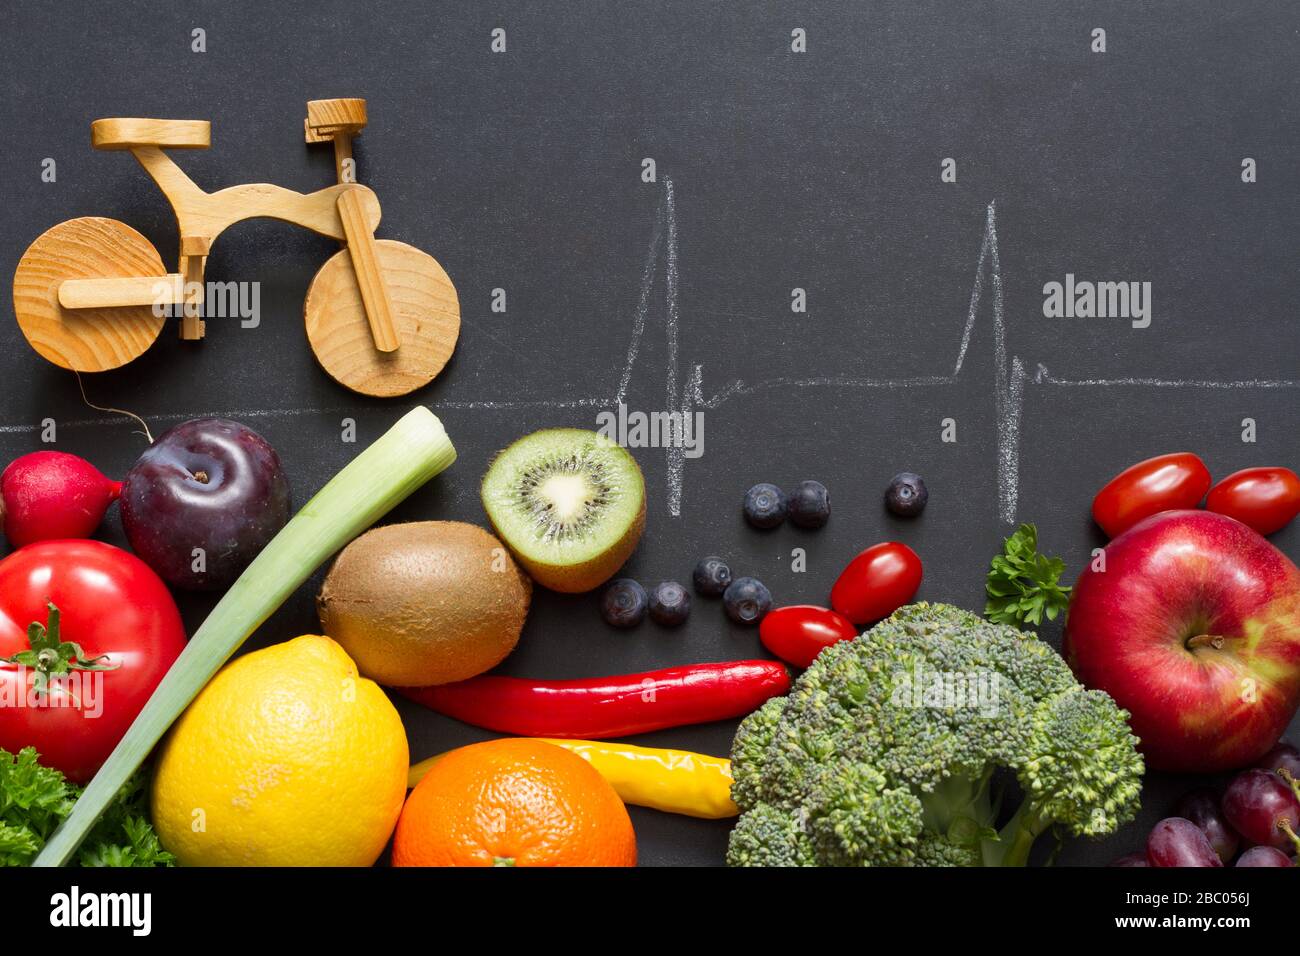 Health food for heart diet nutrition concept with cardiogram and bike Stock Photo